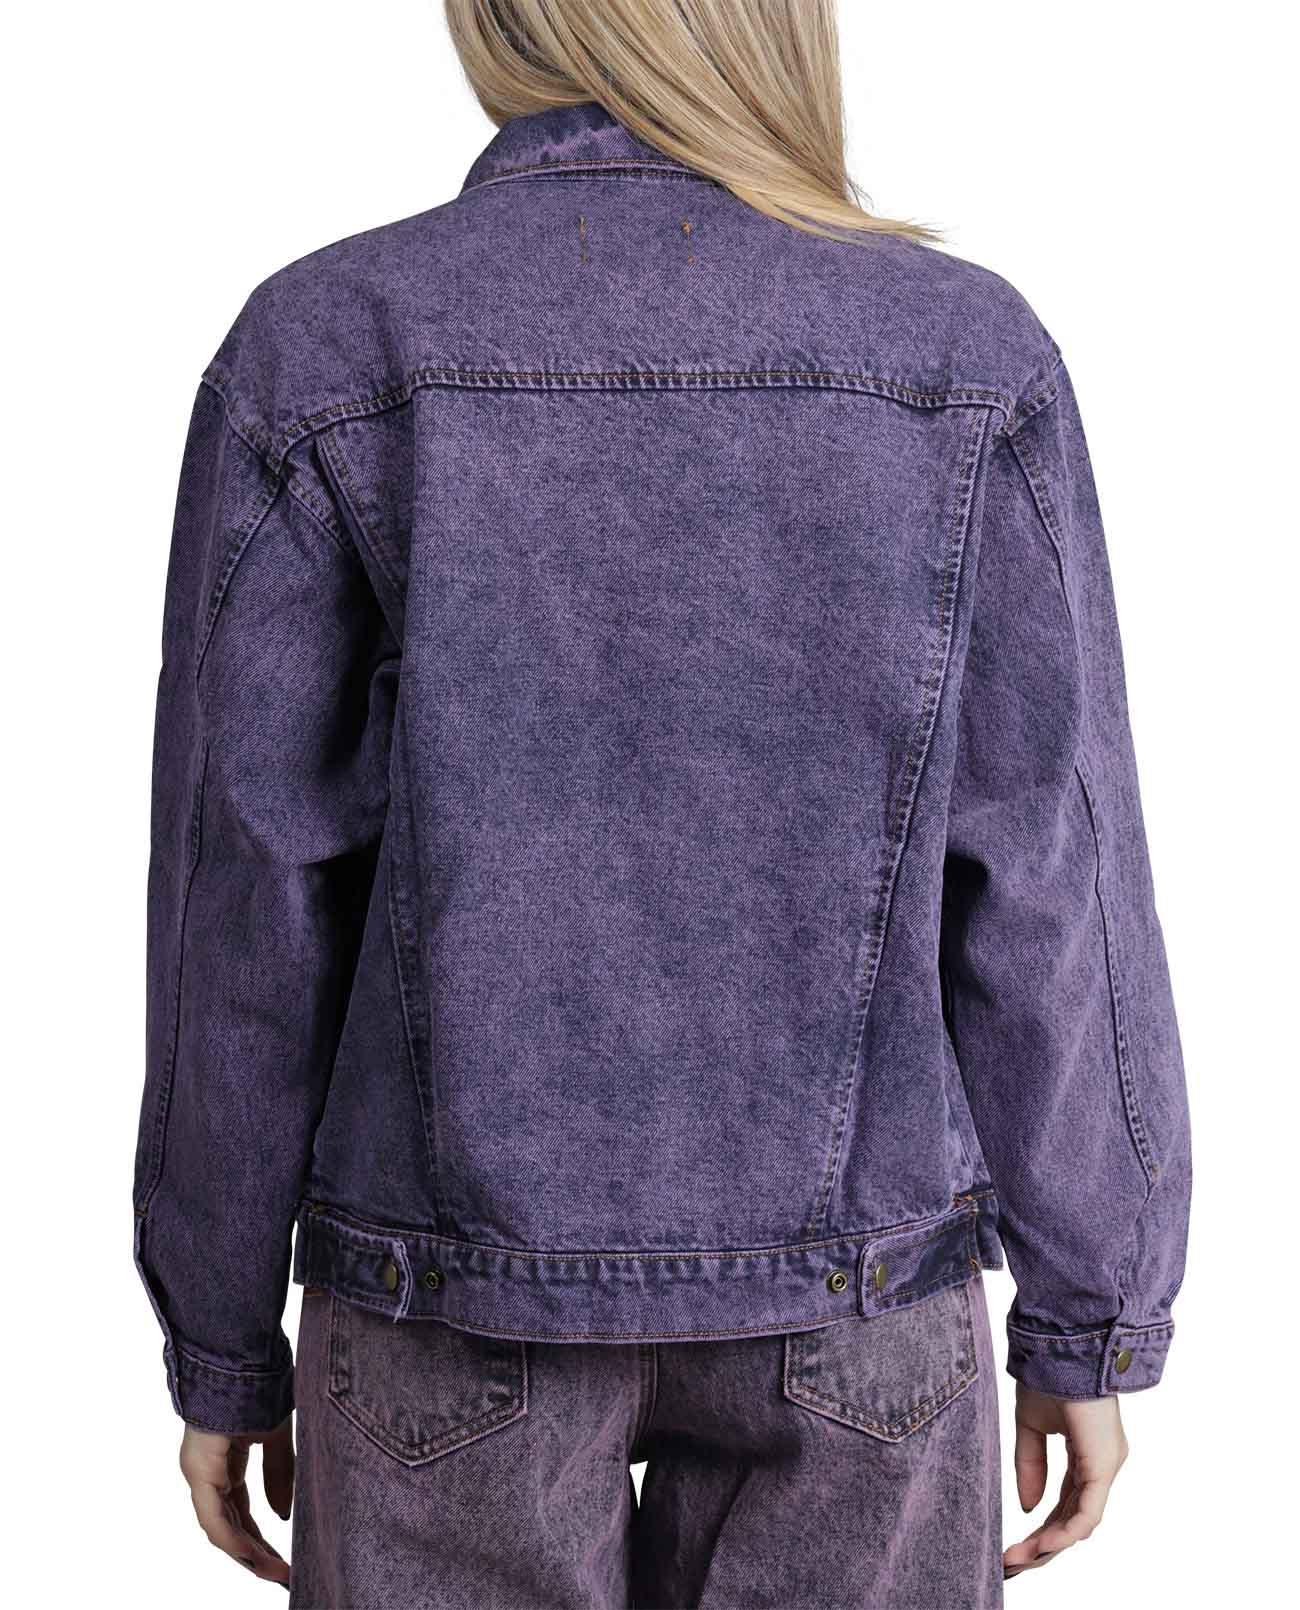 Liberal Youth Ministry Purple Denim Jacket in Blue